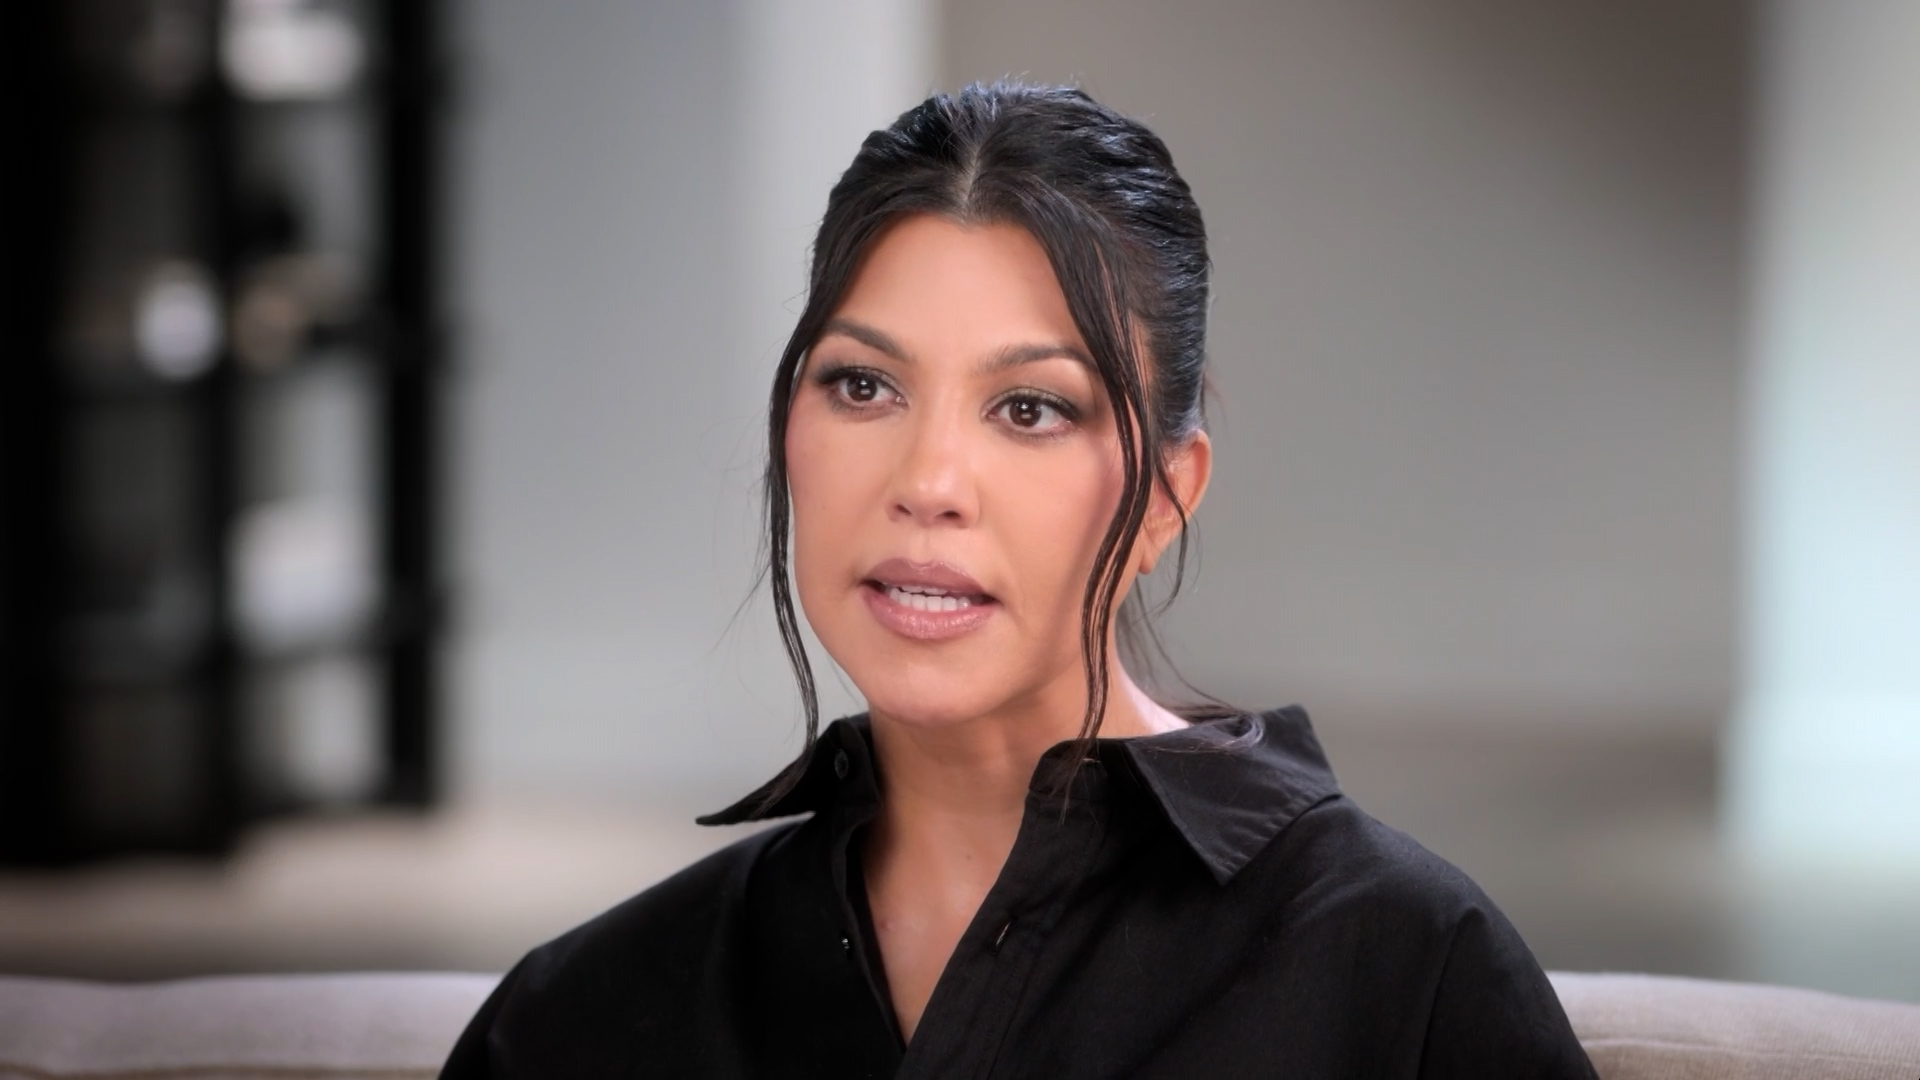 Kourtney Kardashian opens up about her post-baby anxiety